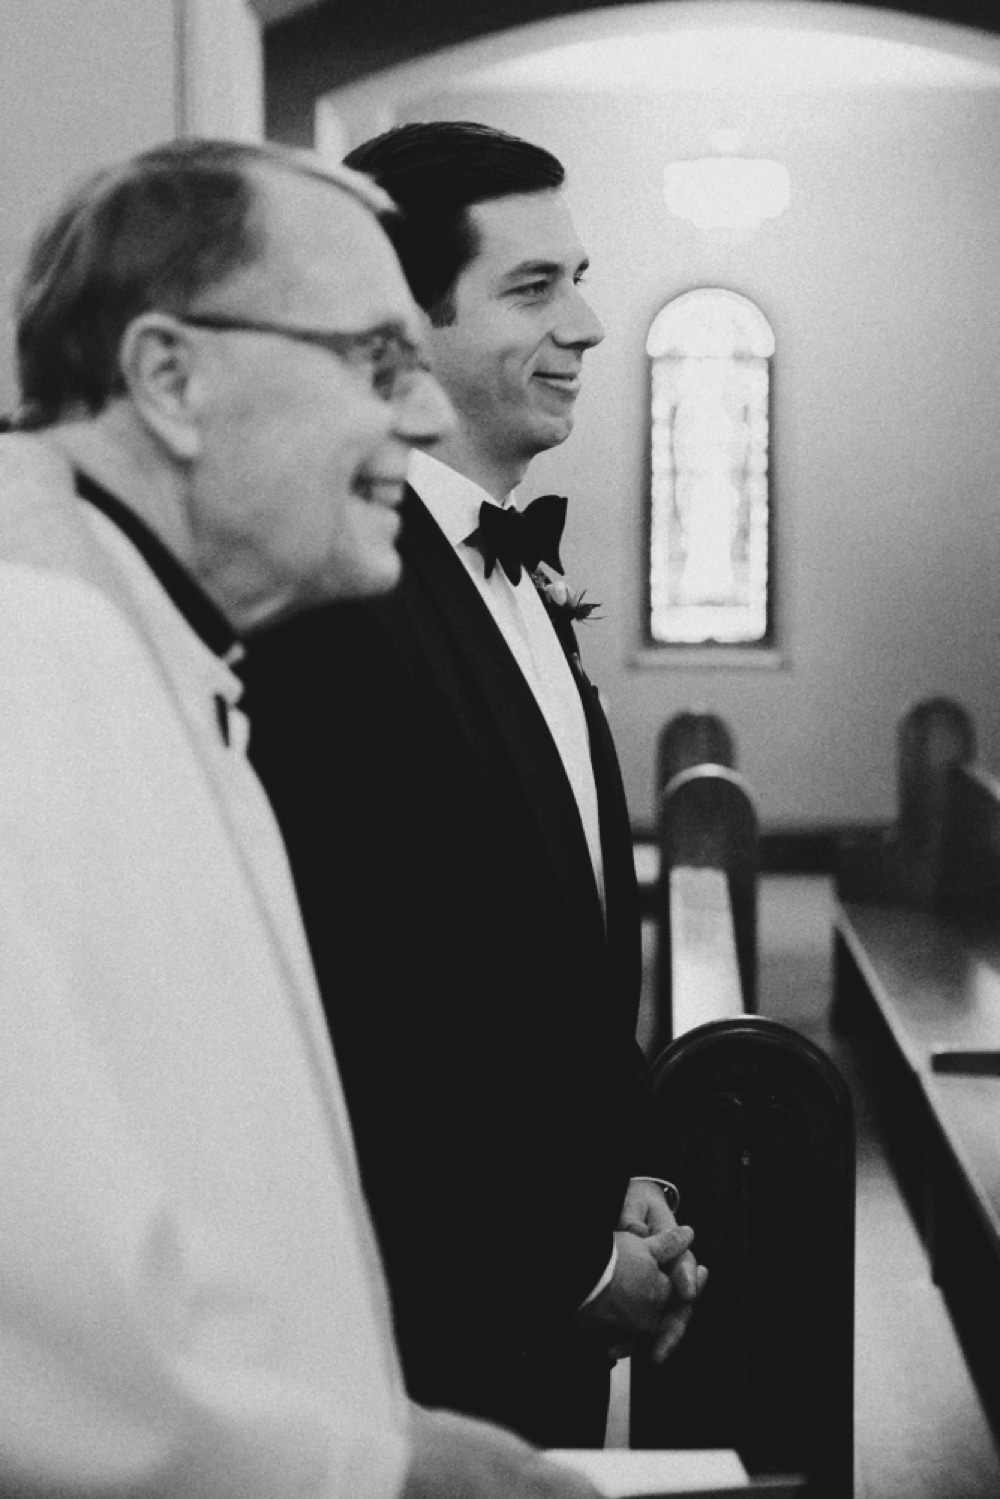 A photojournalistic portrait of a groom smiling as he watches his bride walk down the aisle of the St. Augustin's Church during a Newport, Rhode Island Wedding